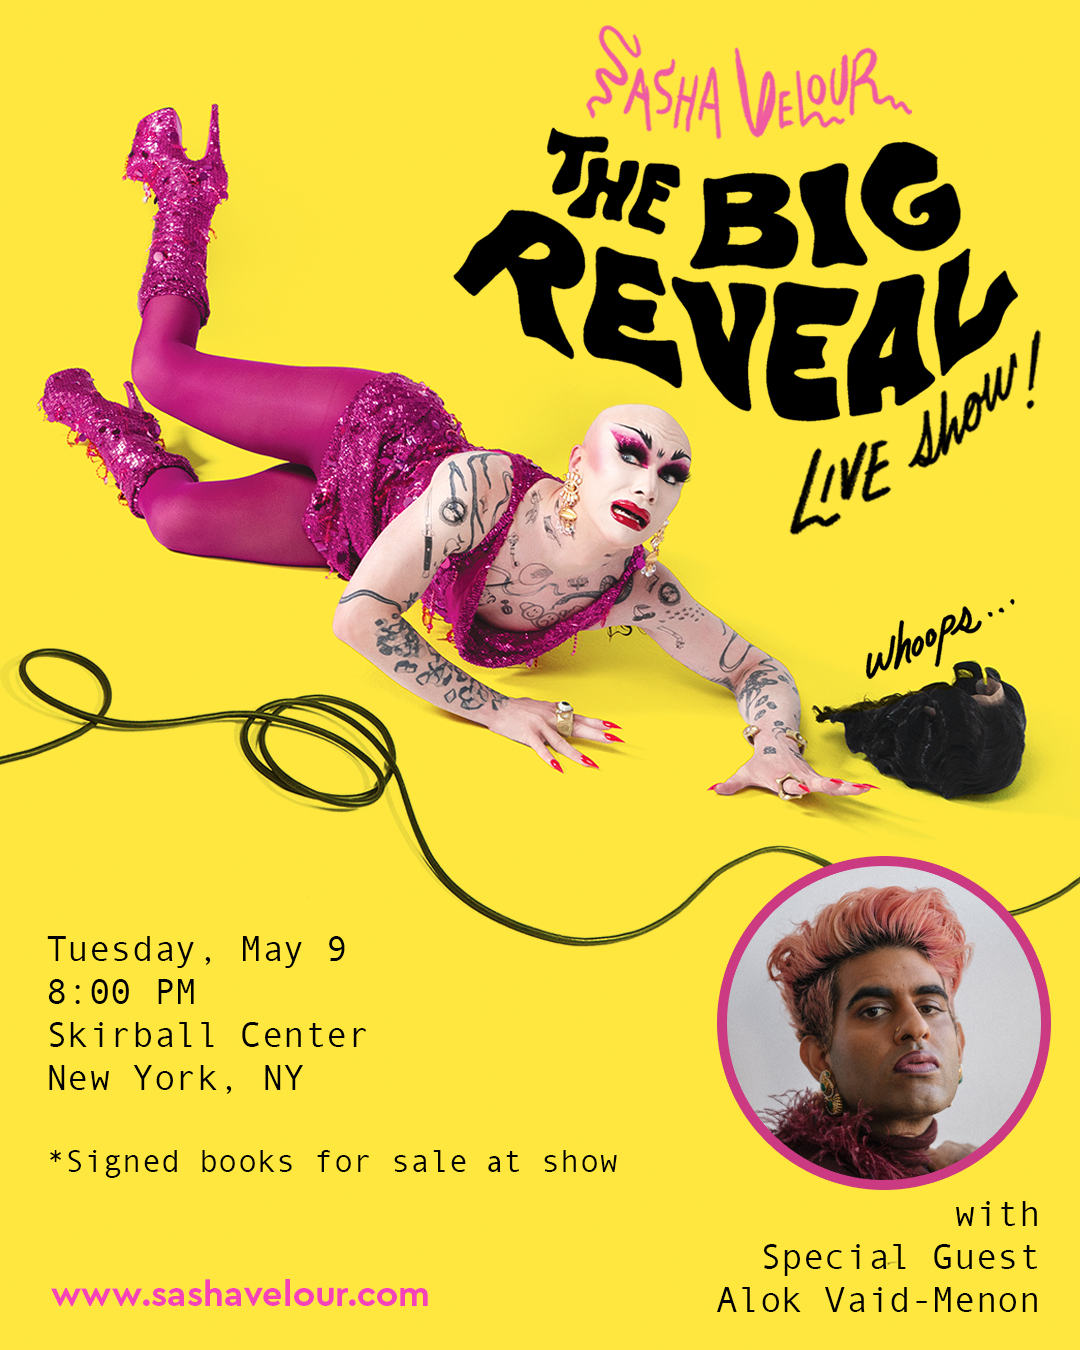 Sasha Velour The Big Reveal Live Show! Tuesday, May 9 at 8pm. Skirball Center, NYC. With special guest Alok Vaid-Menon. Signed books for sale at show. Sashavelour.com